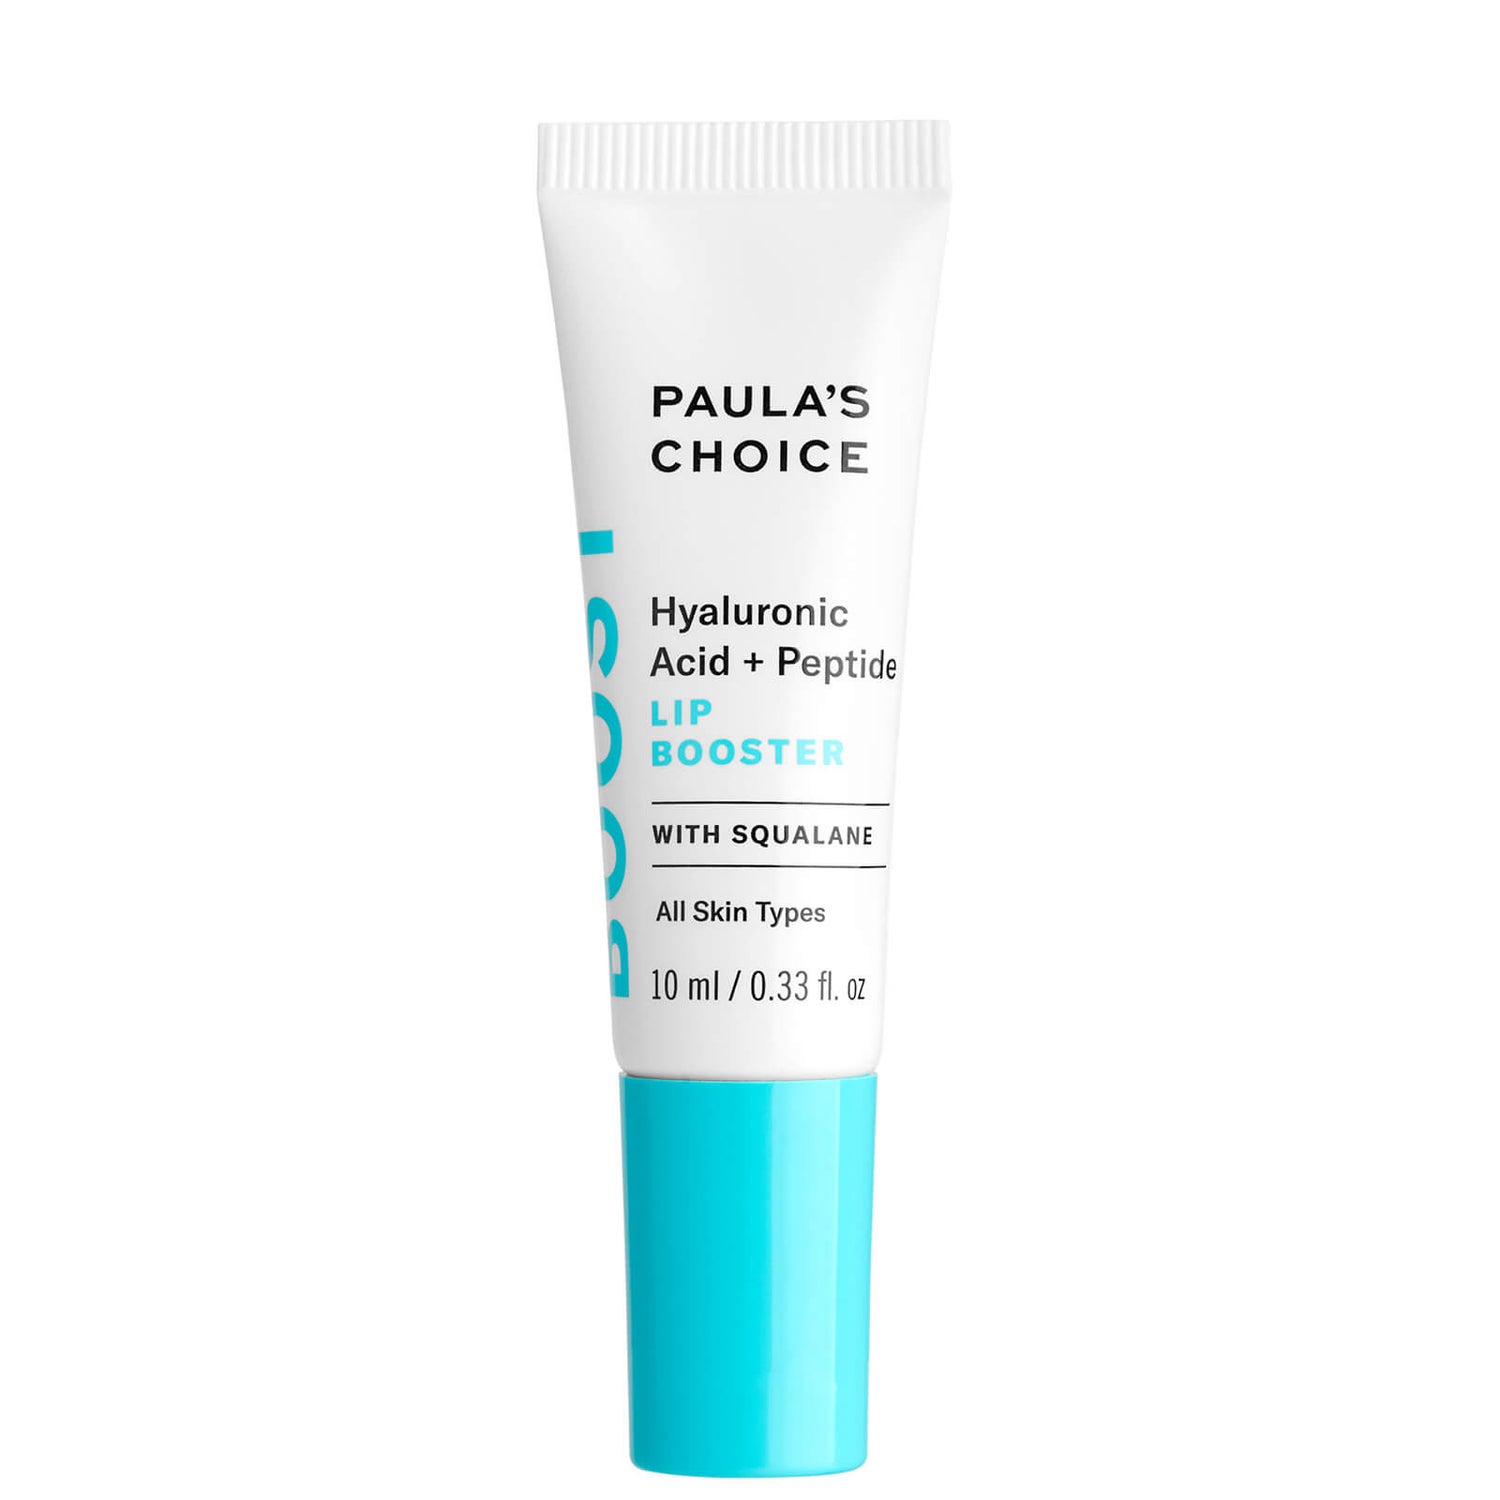 Paula's Choice Hyaluronic Acid and Peptide Lip Booster